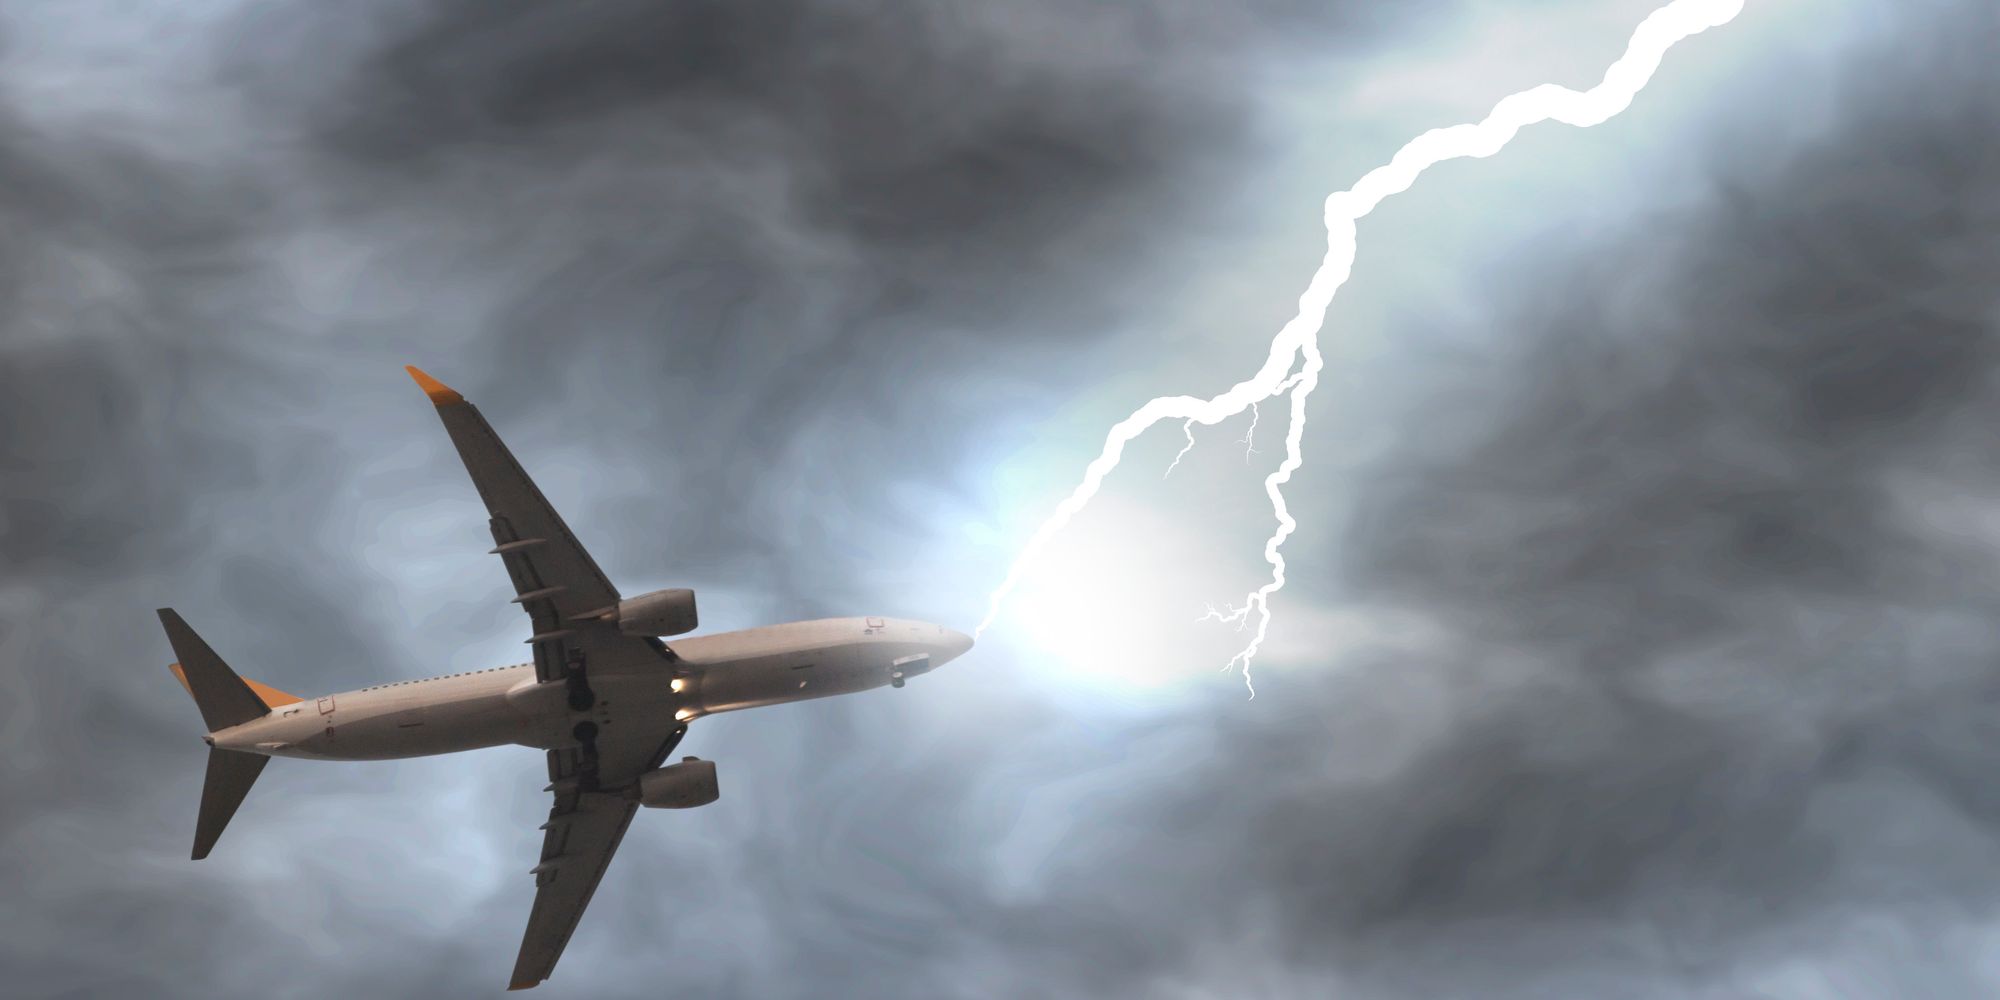 Watch What Happens When A Plane Gets Struck By Lightning The